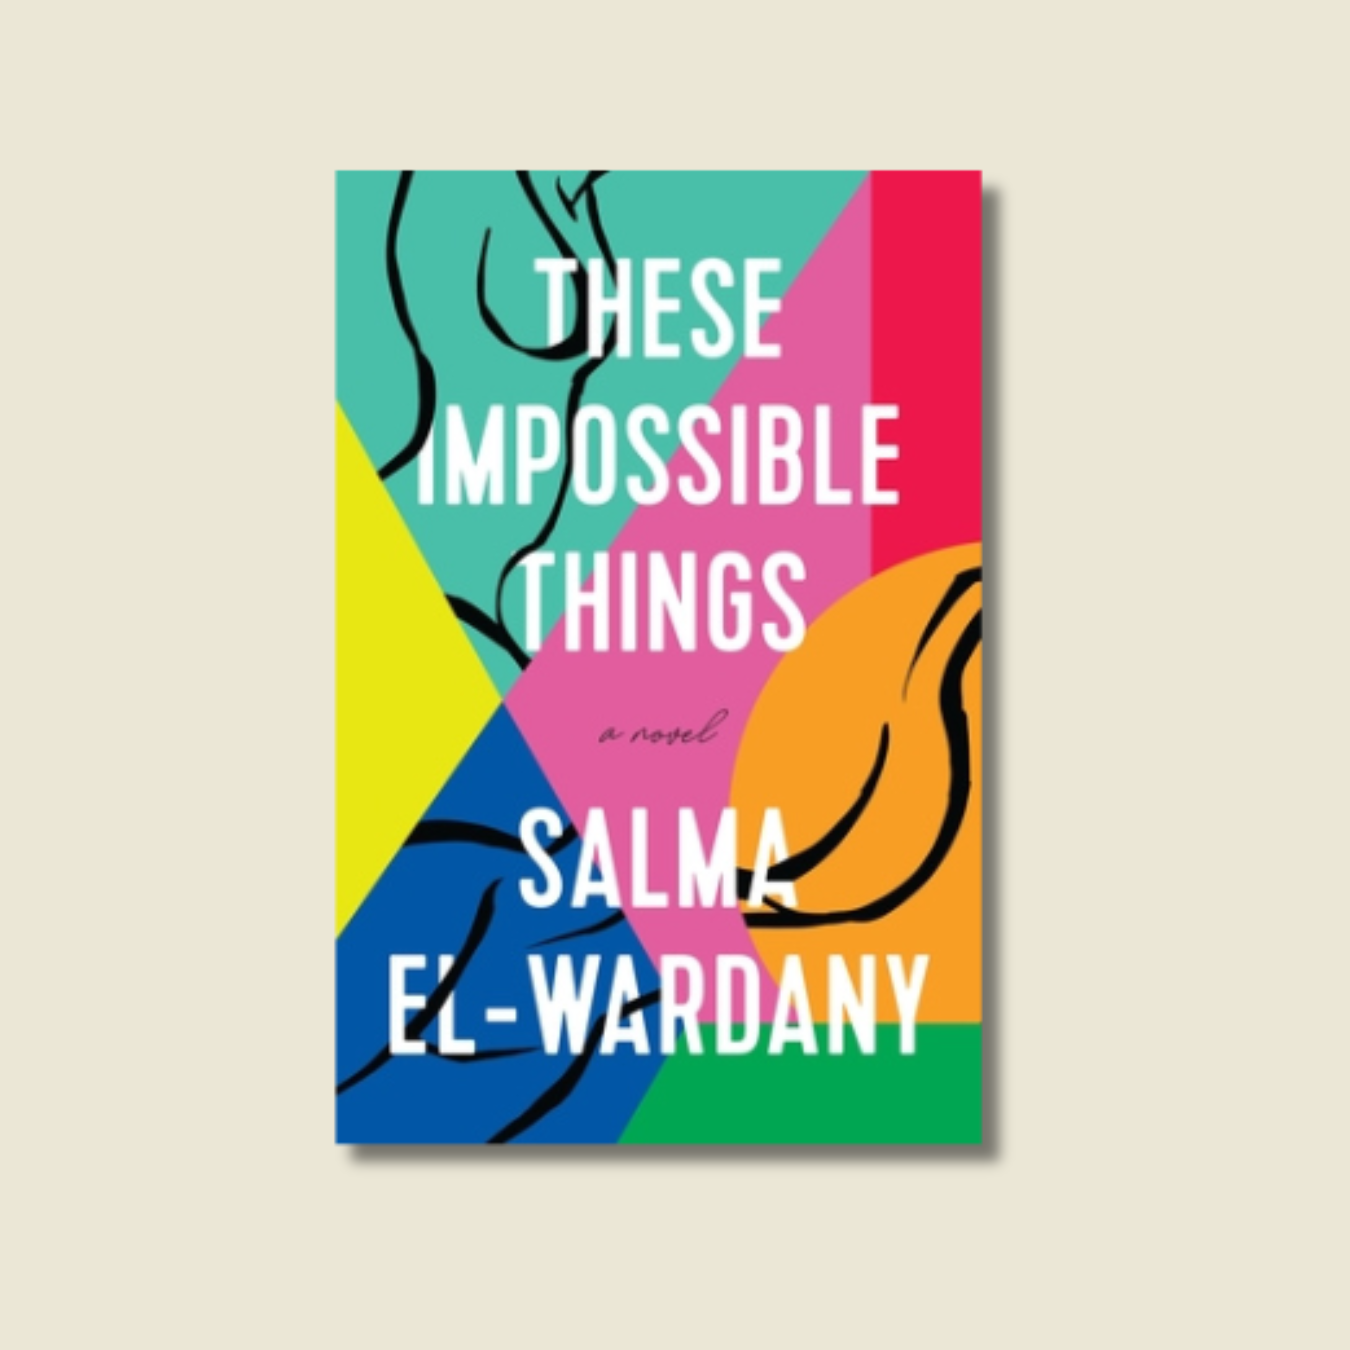 THESE IMPOSSIBLE THINGS BY SALMA EL-WARDANY